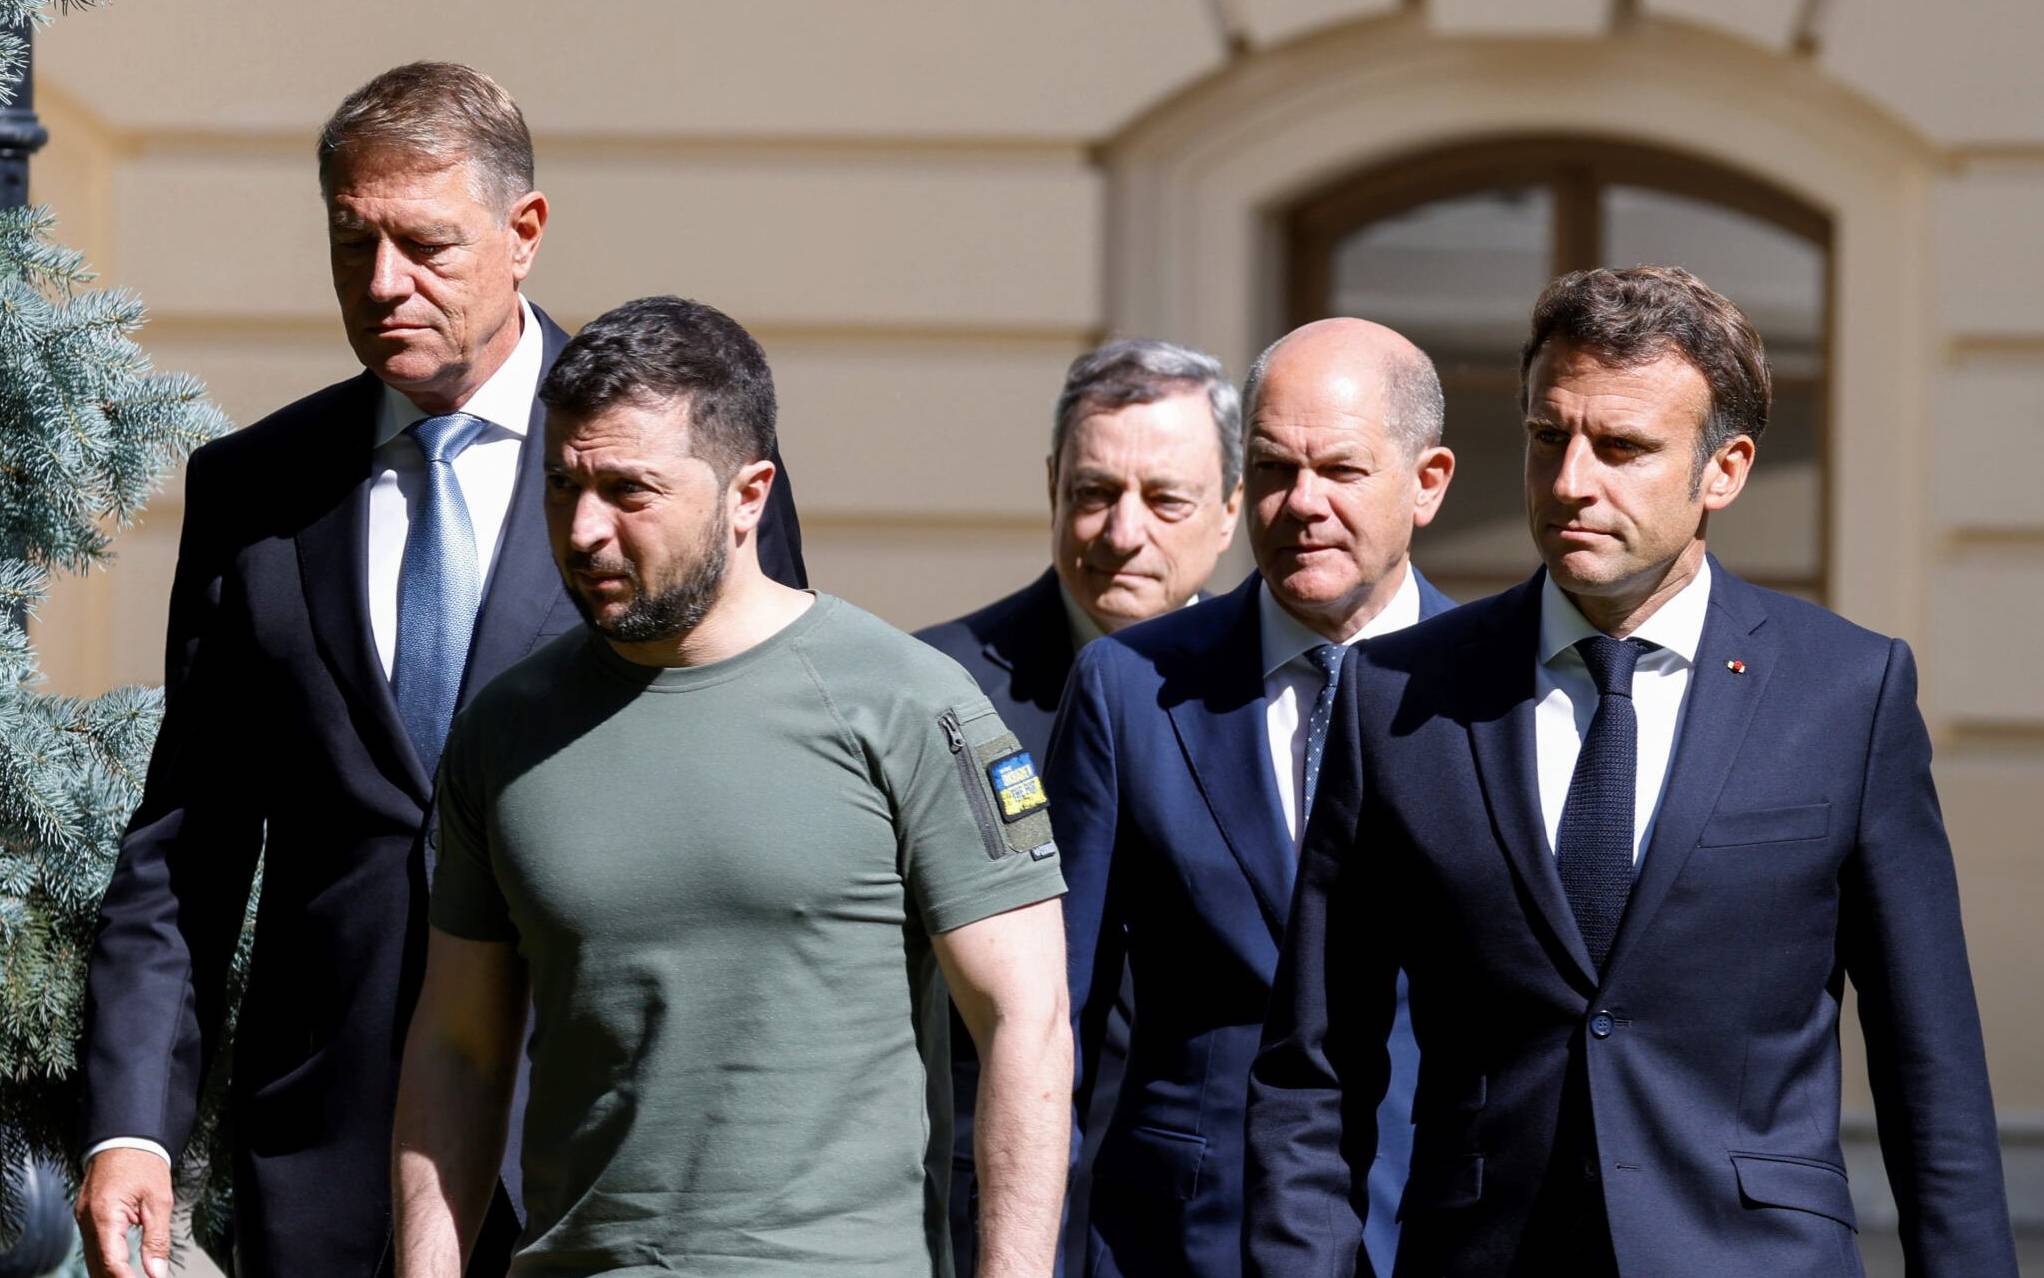 (From L) Romanian President Klaus Iohannis, Ukrainian President Volodymyr Zelensky,  Italian Prime Minister Mario Draghi, German Chancellor Olaf Scholz and French President Emmanuel Macron arrive for a press conference in at Mariinsky Palace in Kyiv, on June 16, 2022. - The leaders of major EU powers France, Germany and Italy vowed on June 16 to help Ukraine defeat Russia and to rebuild its shattered cities, in a visit to a war-torn Kyiv suburb. (Photo by Ludovic MARIN / POOL / AFP)